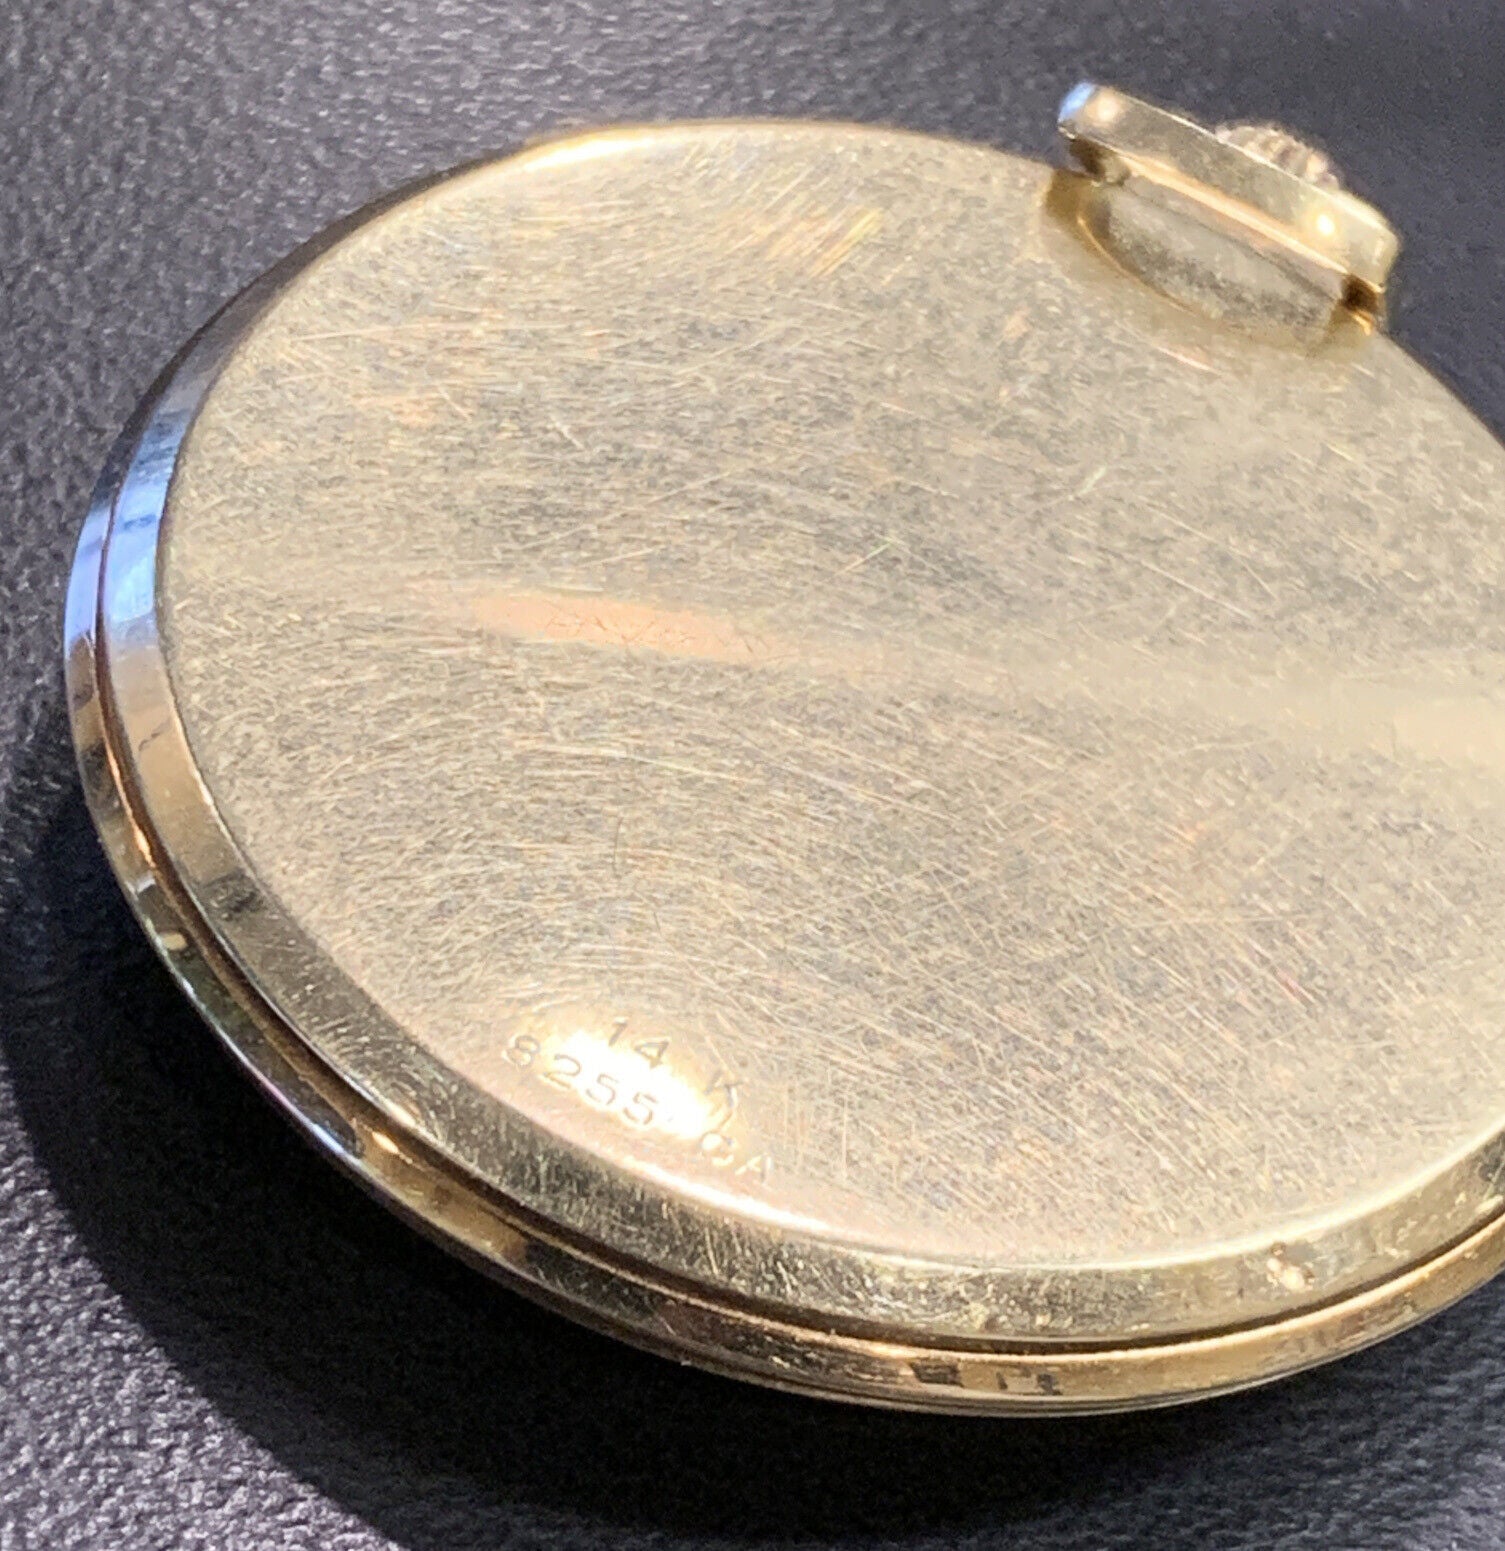 14k Gold Girard Perregaux Open Face Pocket Watch for Tiffany & Co. Size 18